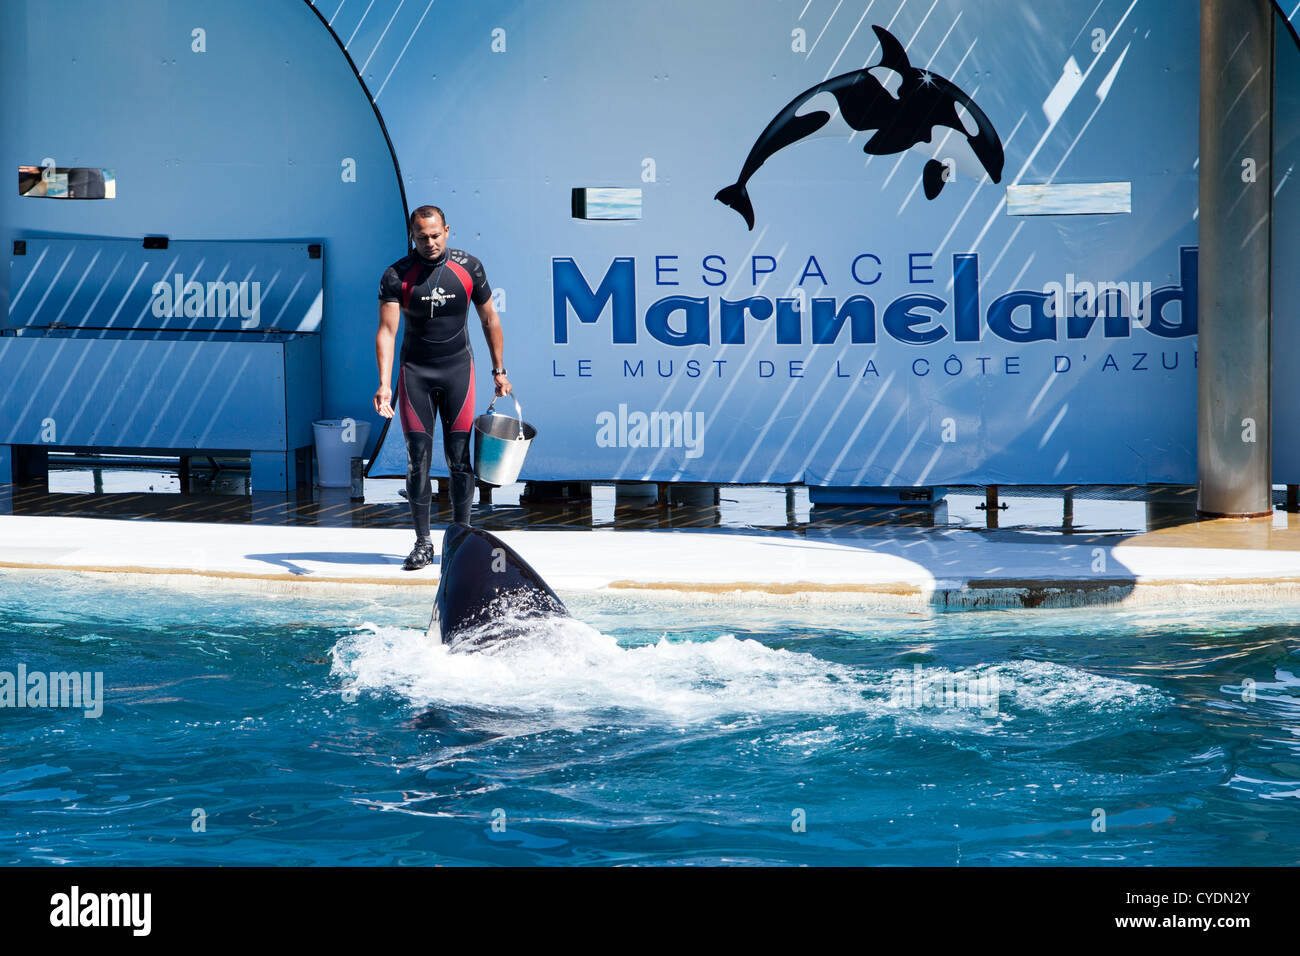 Antibes, France - May 3, 2012: Marineland entertainment park - whale trainer feeding killer whale after training session Stock Photo